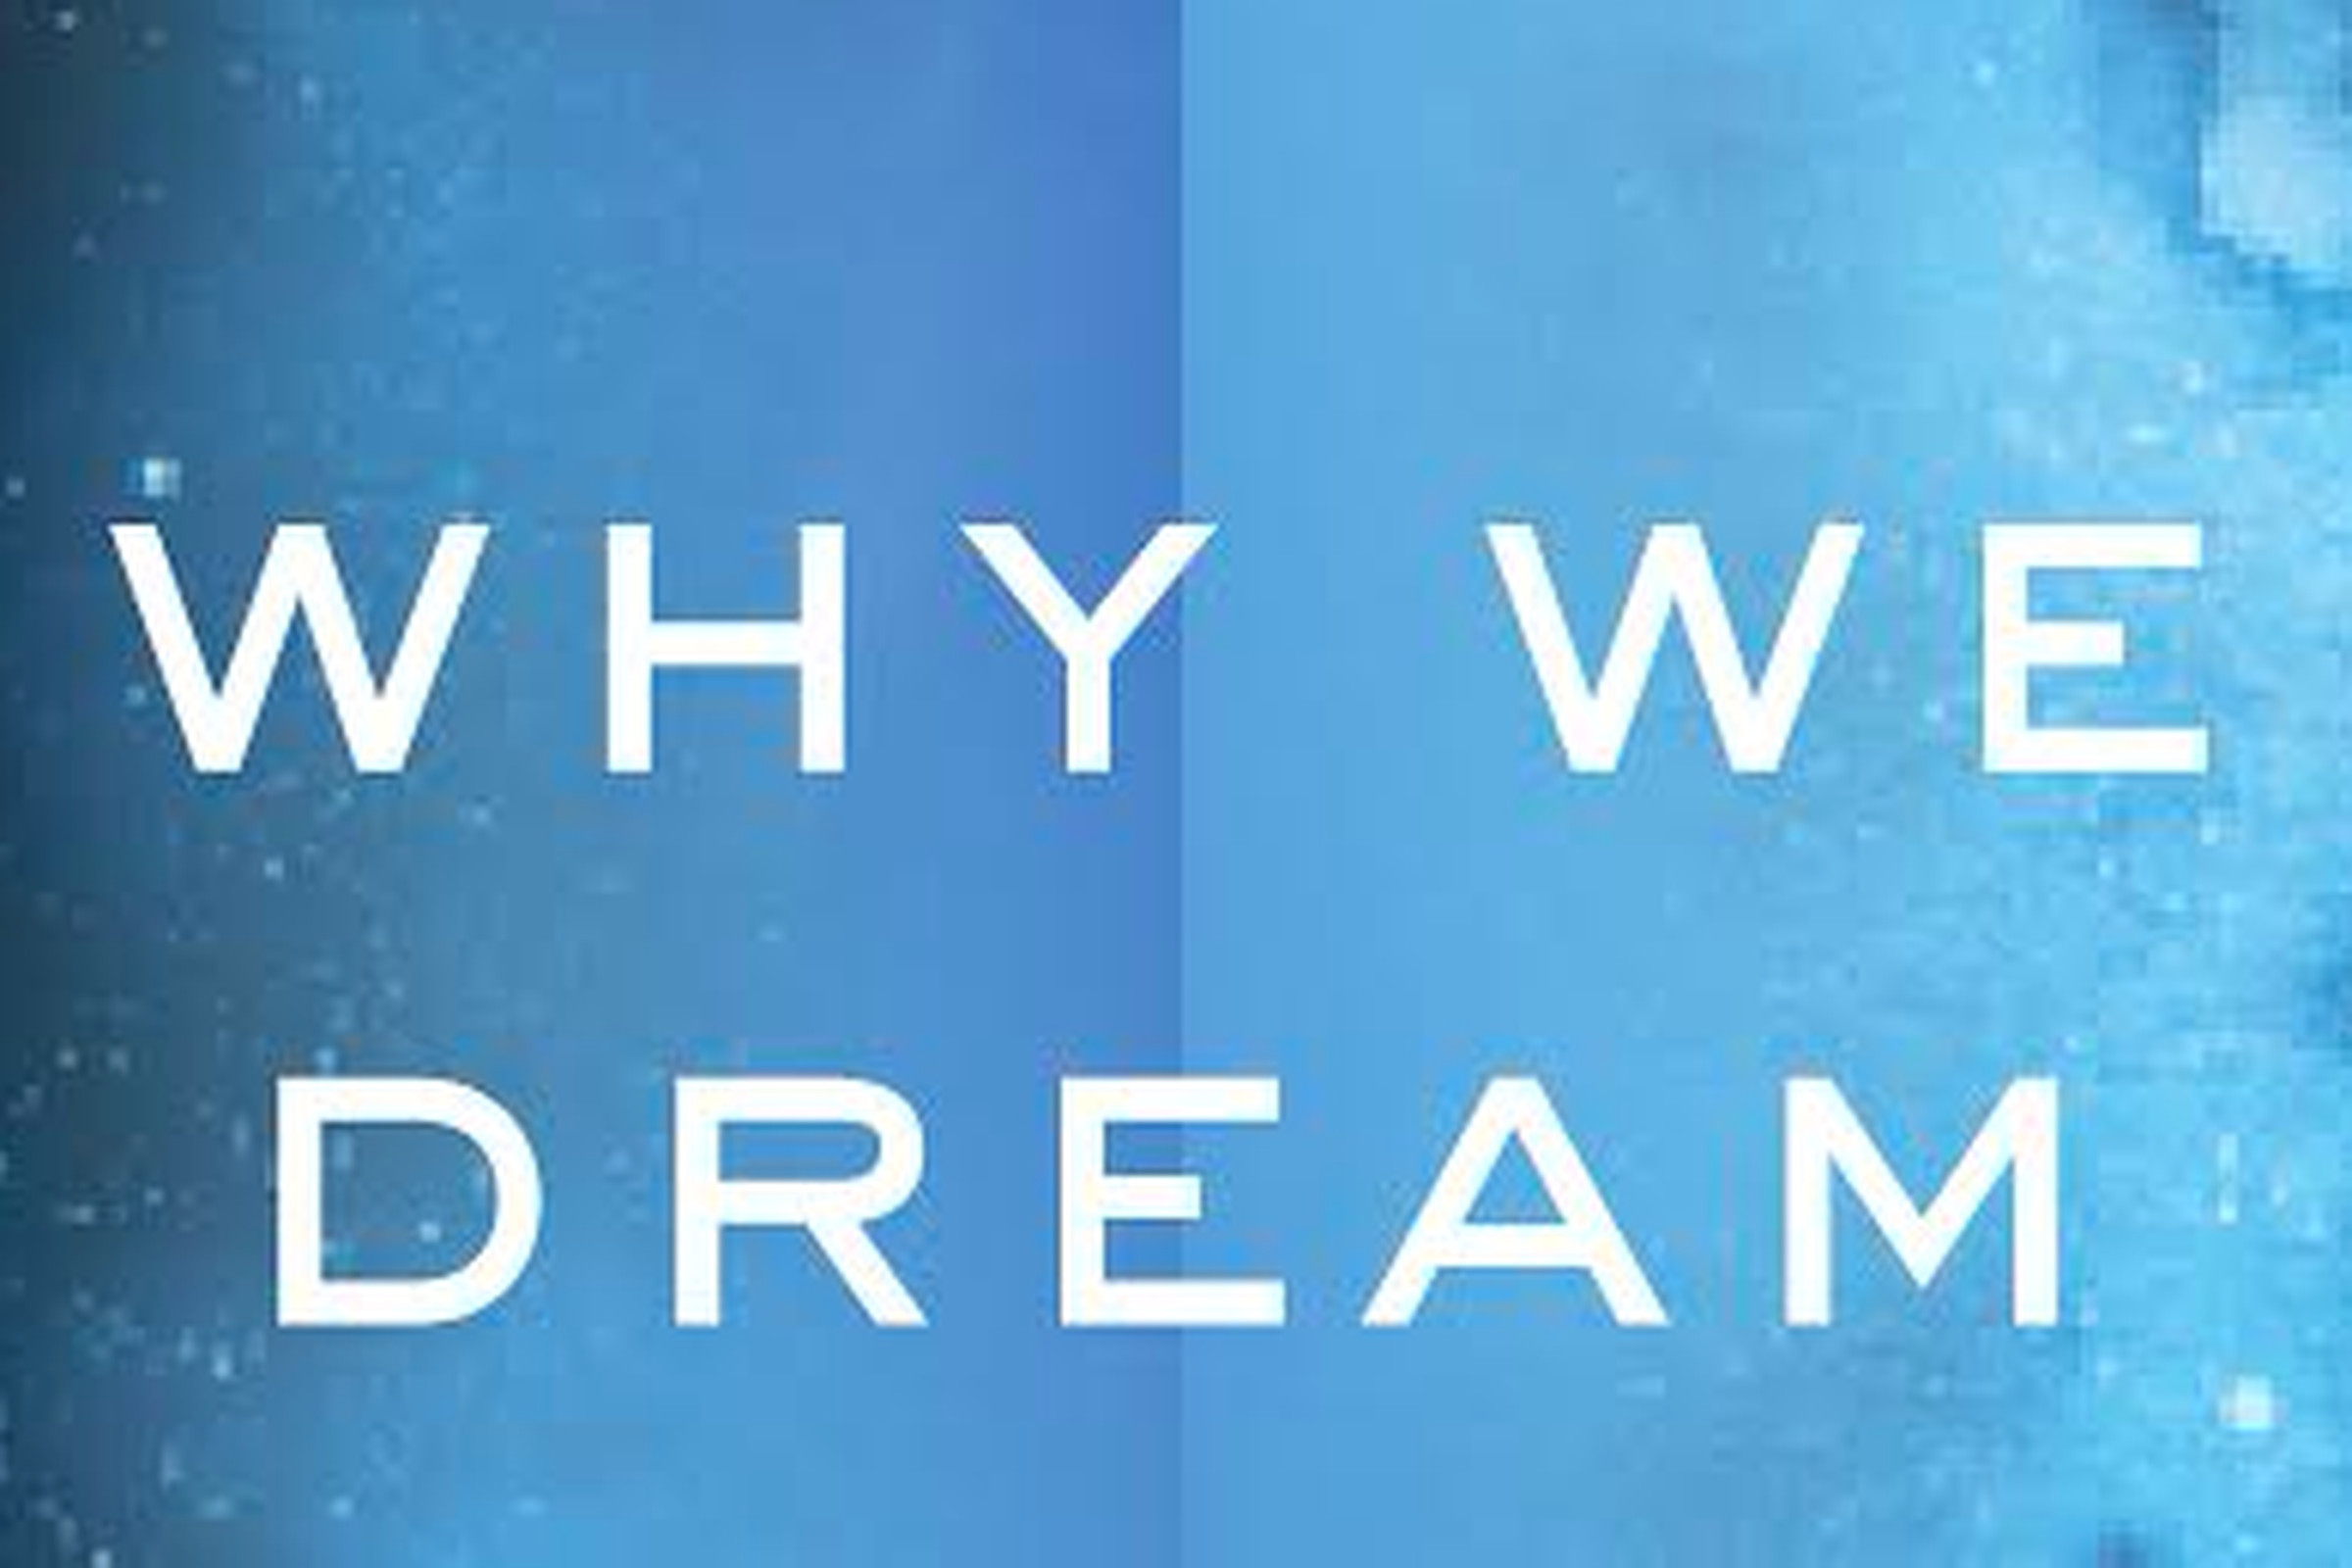 research about dreams